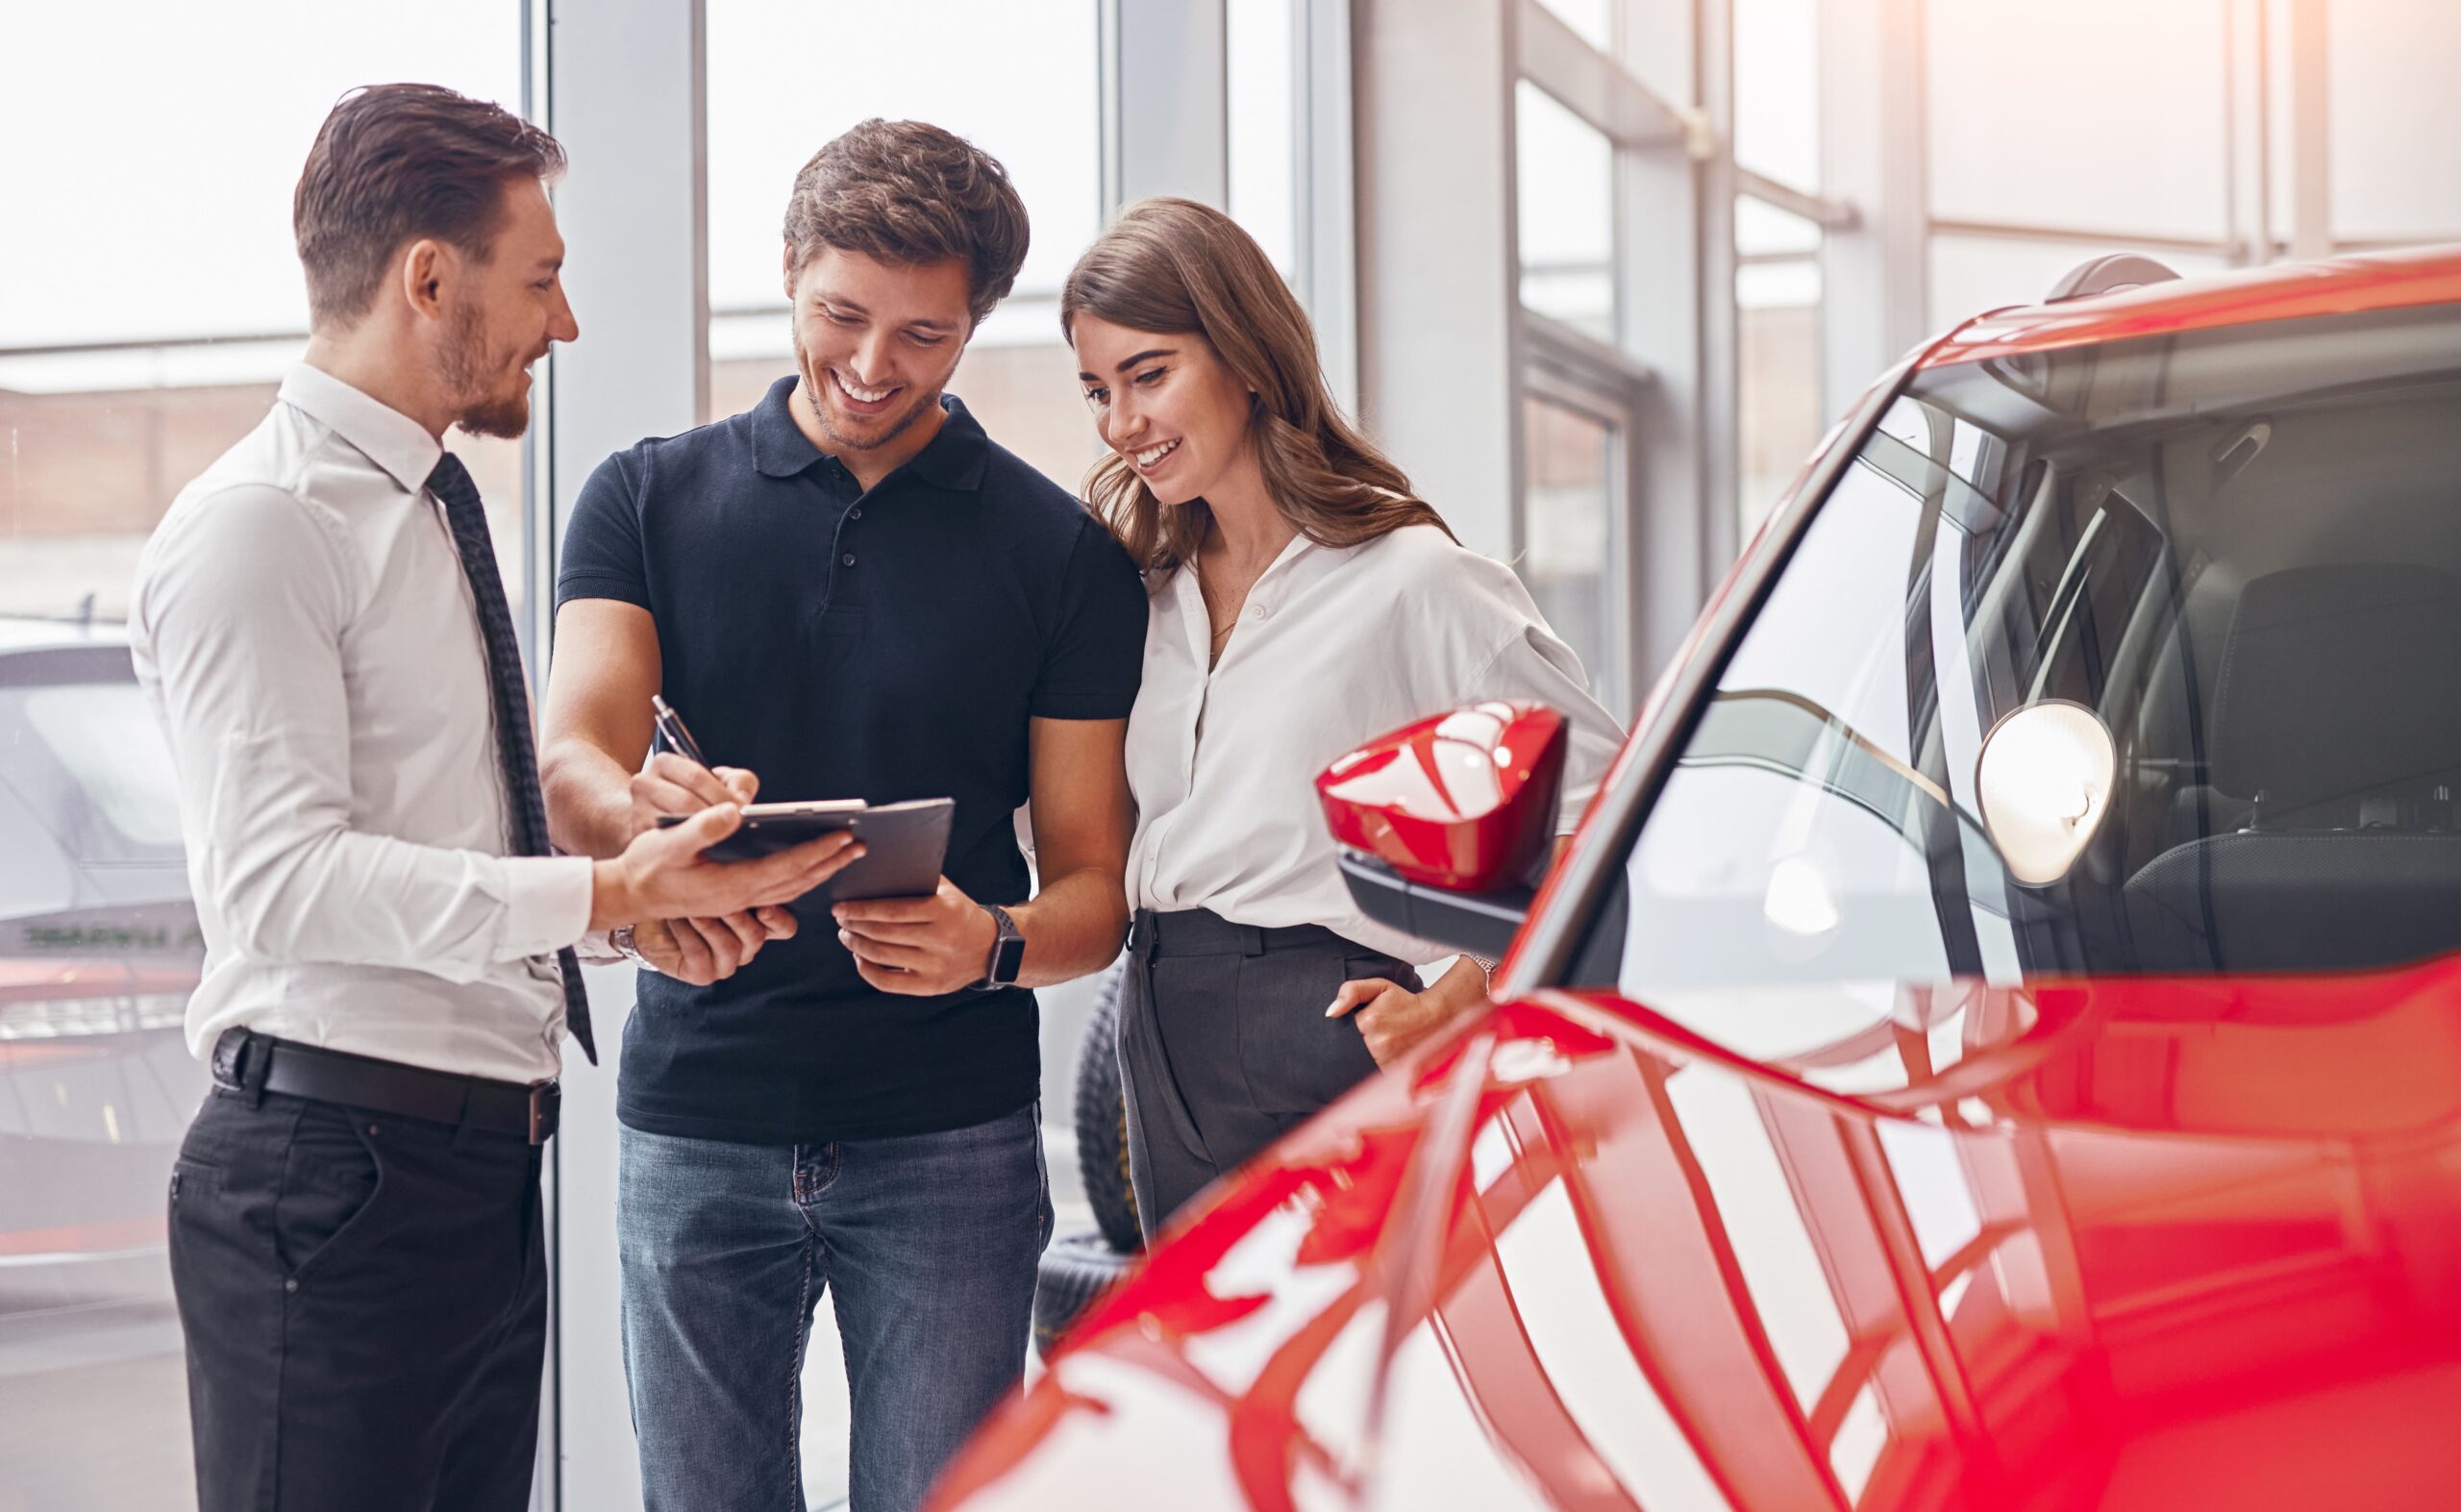 The picture shows three people in a car dealership. On the left, there is a man who appears to be a car salesman. He is wearing a white shirt with a tie and black trousers. He is holding a clipboard and pen, and is showing something on the clipboard to a young couple standing next to him. The couple is standing in the middle of the picture. The man is wearing a black polo shirt and jeans, and the woman is wearing a white blouse and black trousers. They both look happy and are smiling as they look at the clipboard. On the right side of the picture, there is a part of a red car visible. It seems to be a new car displayed in the dealership. The car's front door is open. The background shows large windows, and it seems to be a bright day outside.